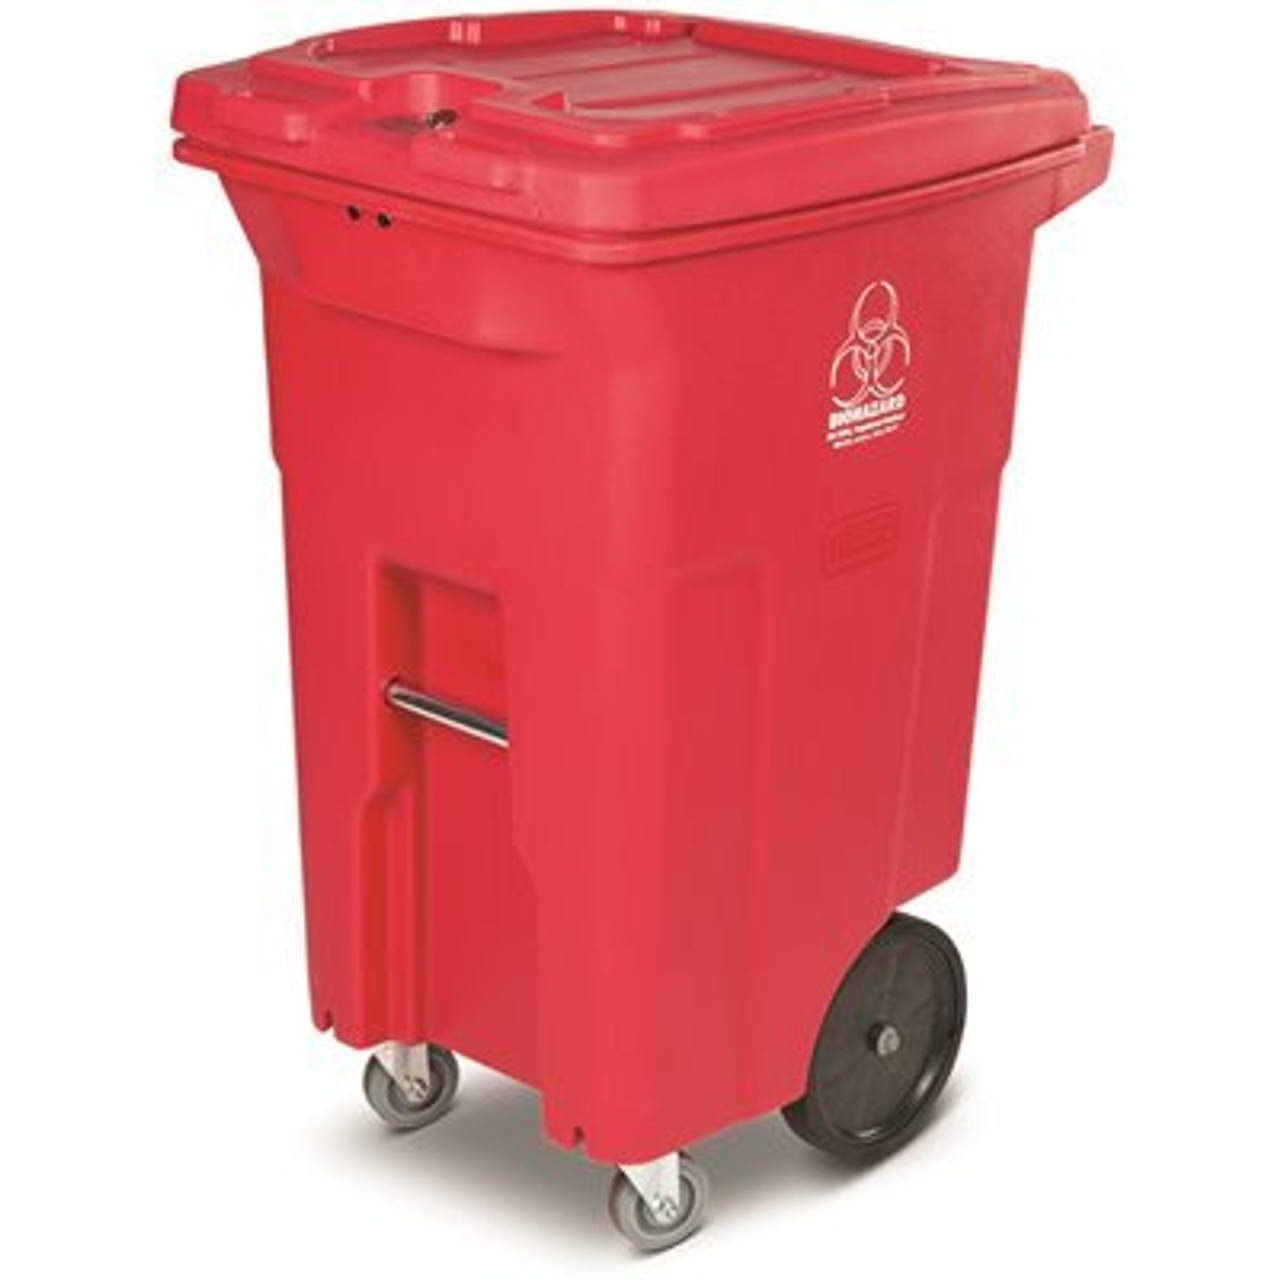 Toter 64 Gal. Red Hazardous Waste Trash Can With Wheels And Lid Lock (2 Caster Wheels 2 Stationary Wheels)